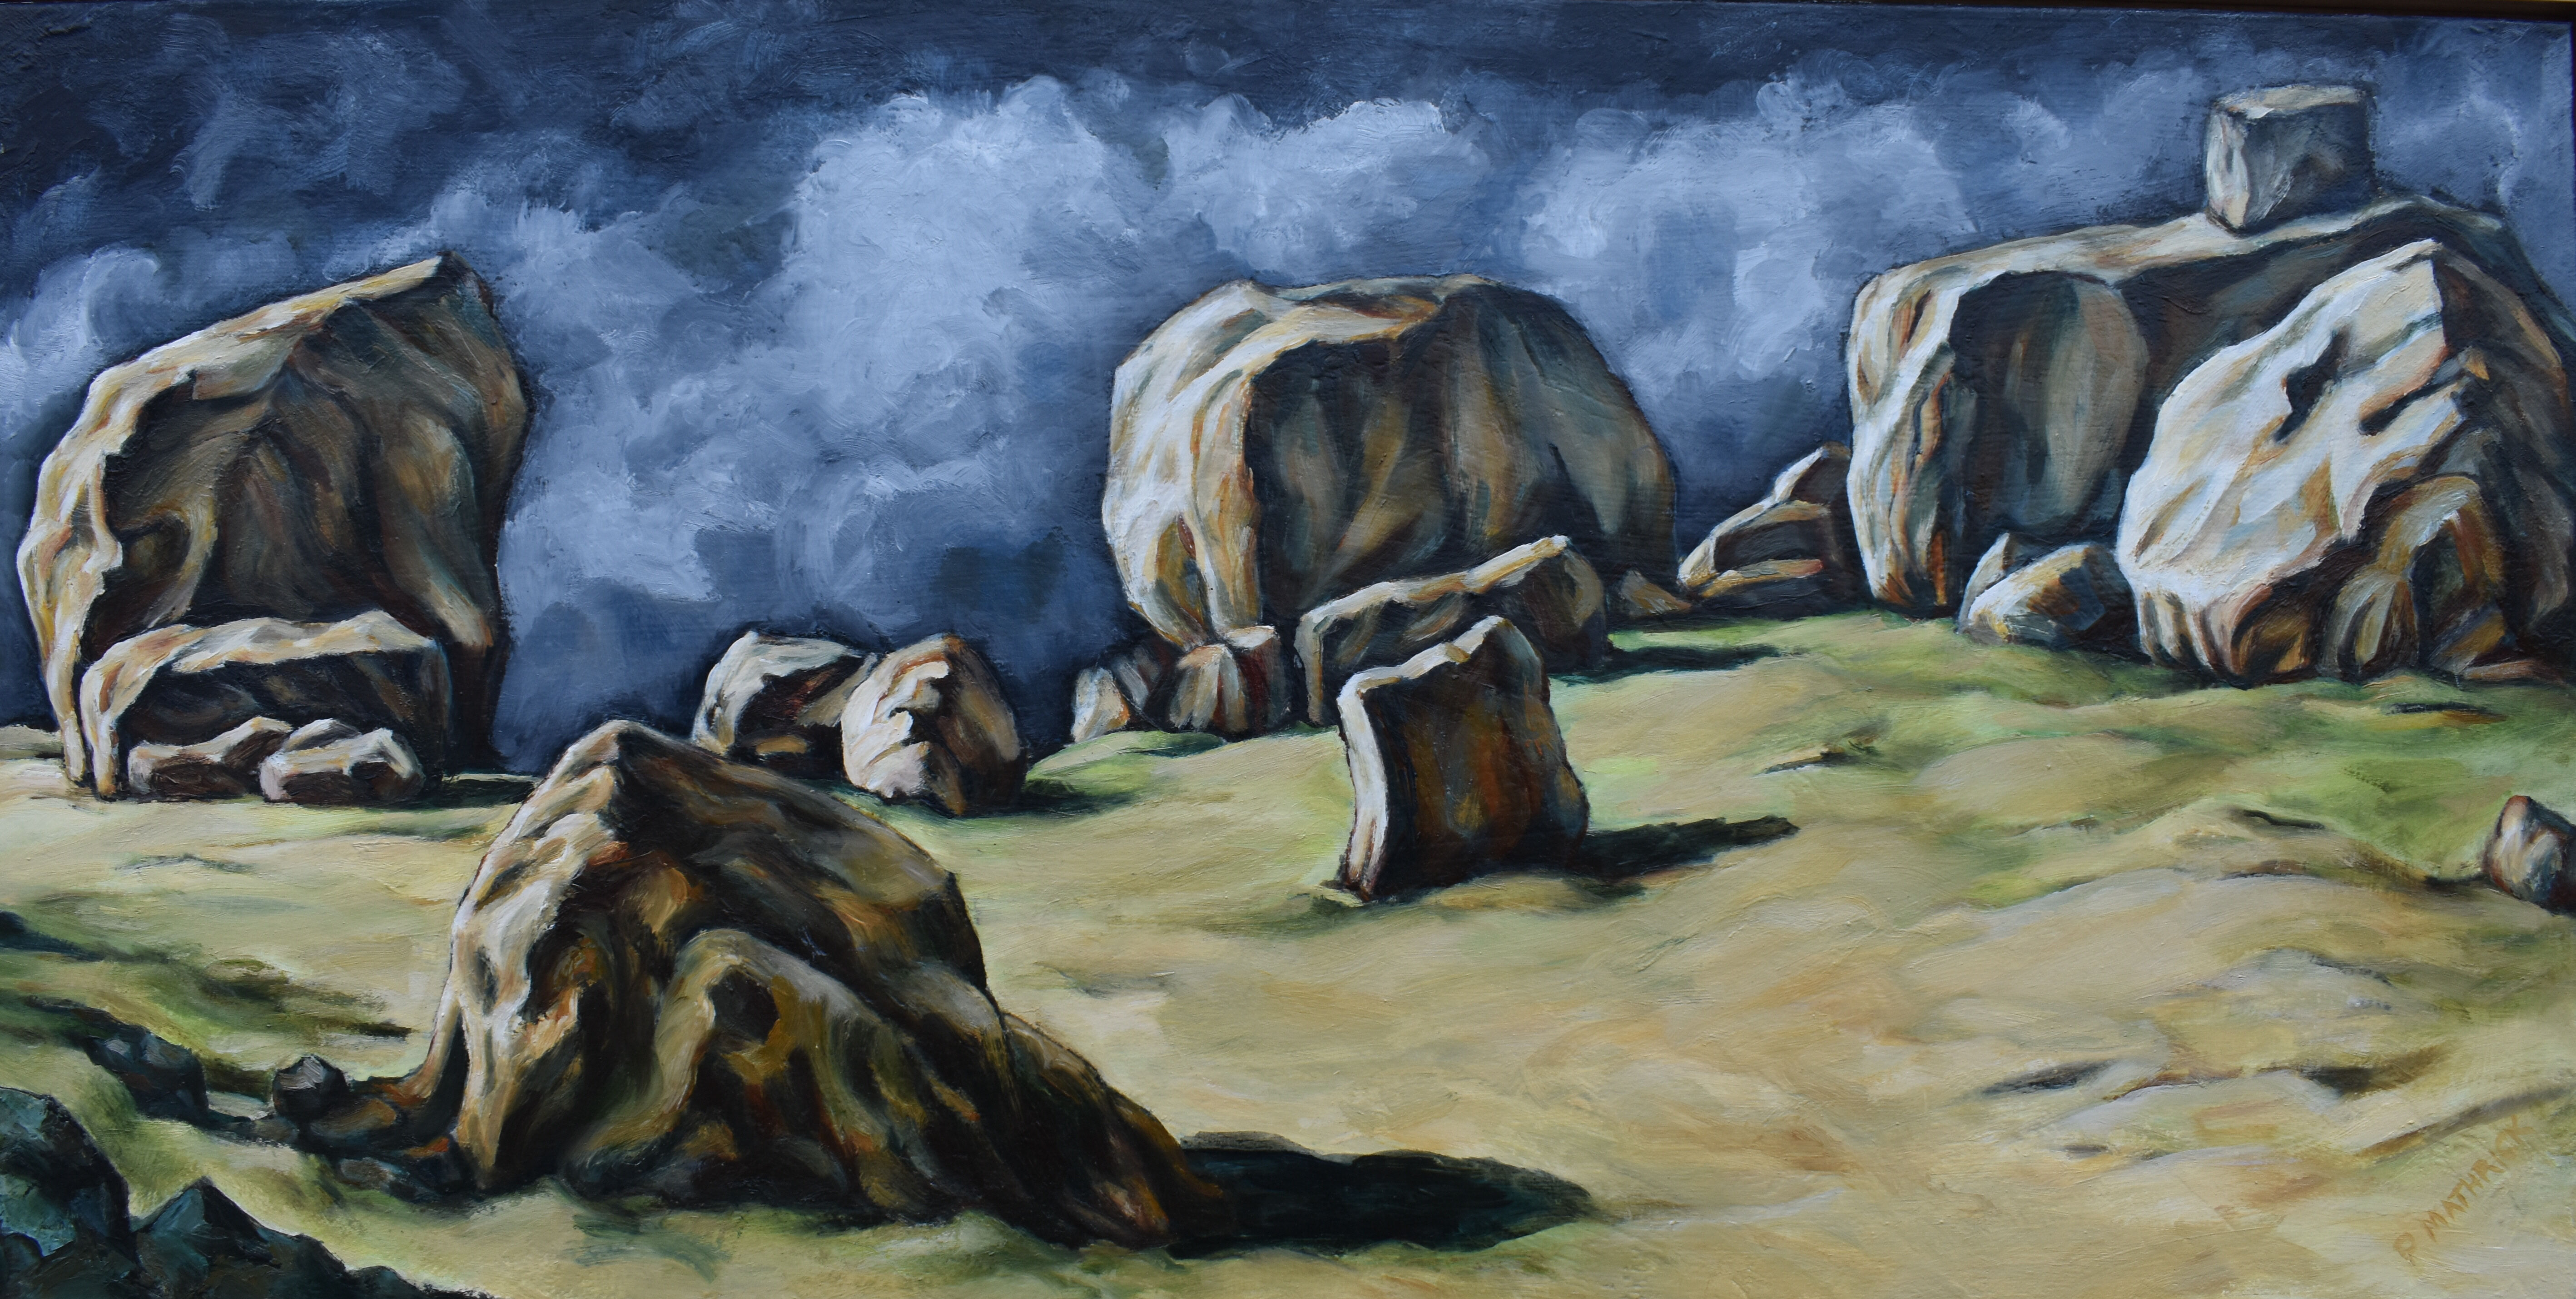 25._Approaching Storm_oil on canvas46cm x 92cm_